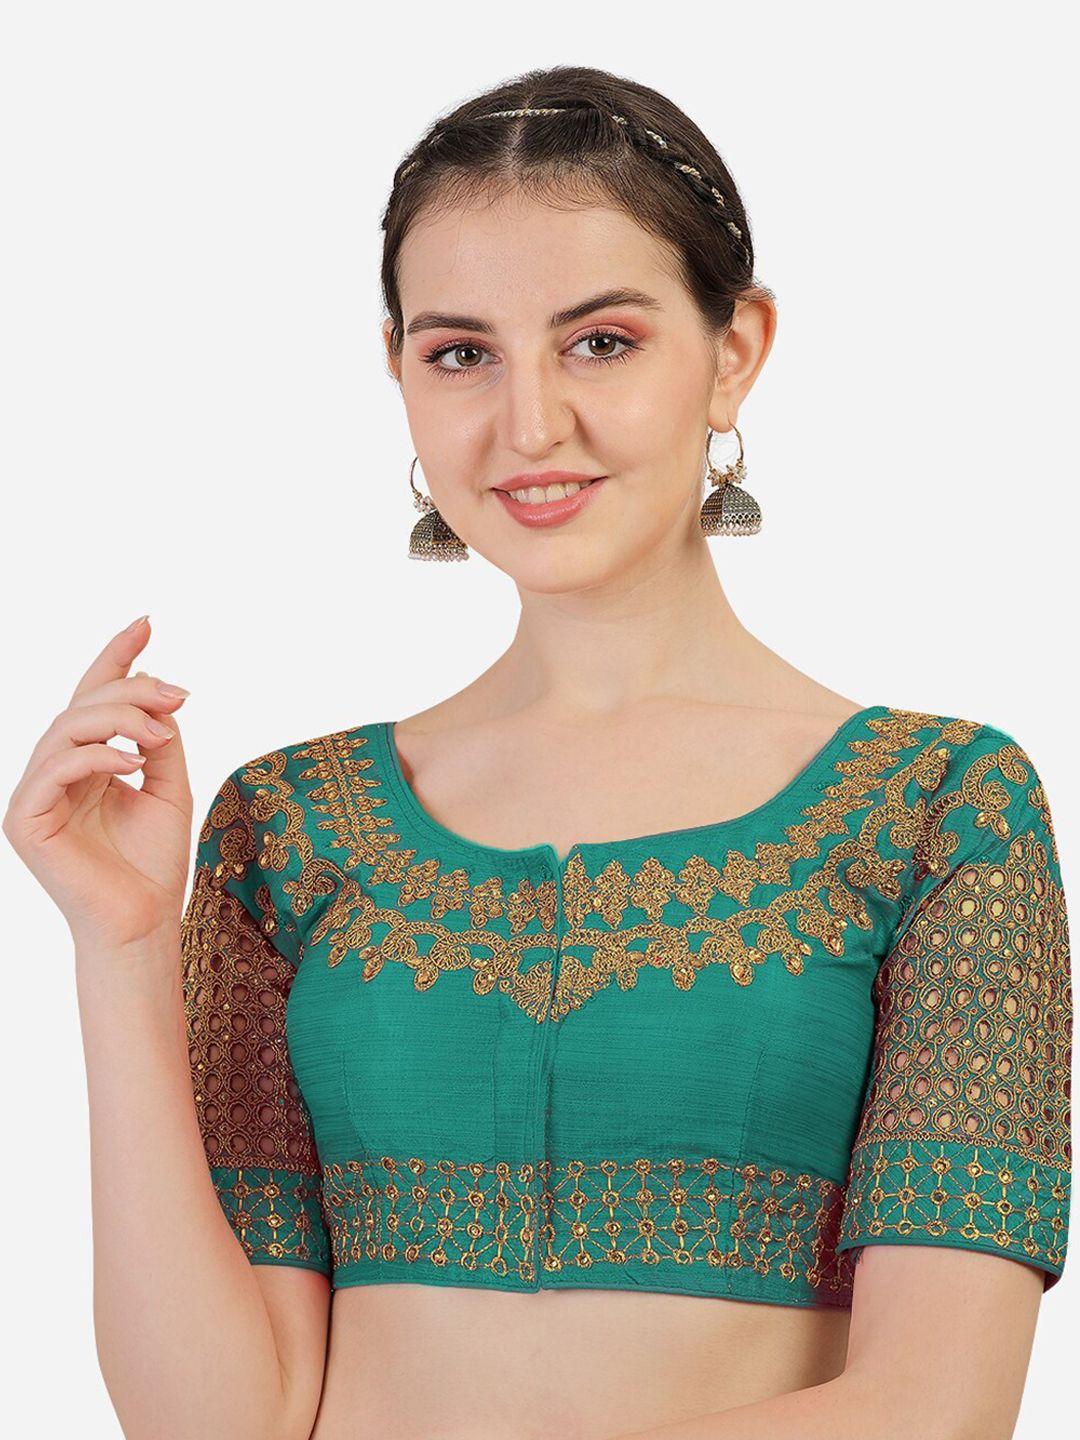 pujia mills teal green & gold-toned embellished saree blouse